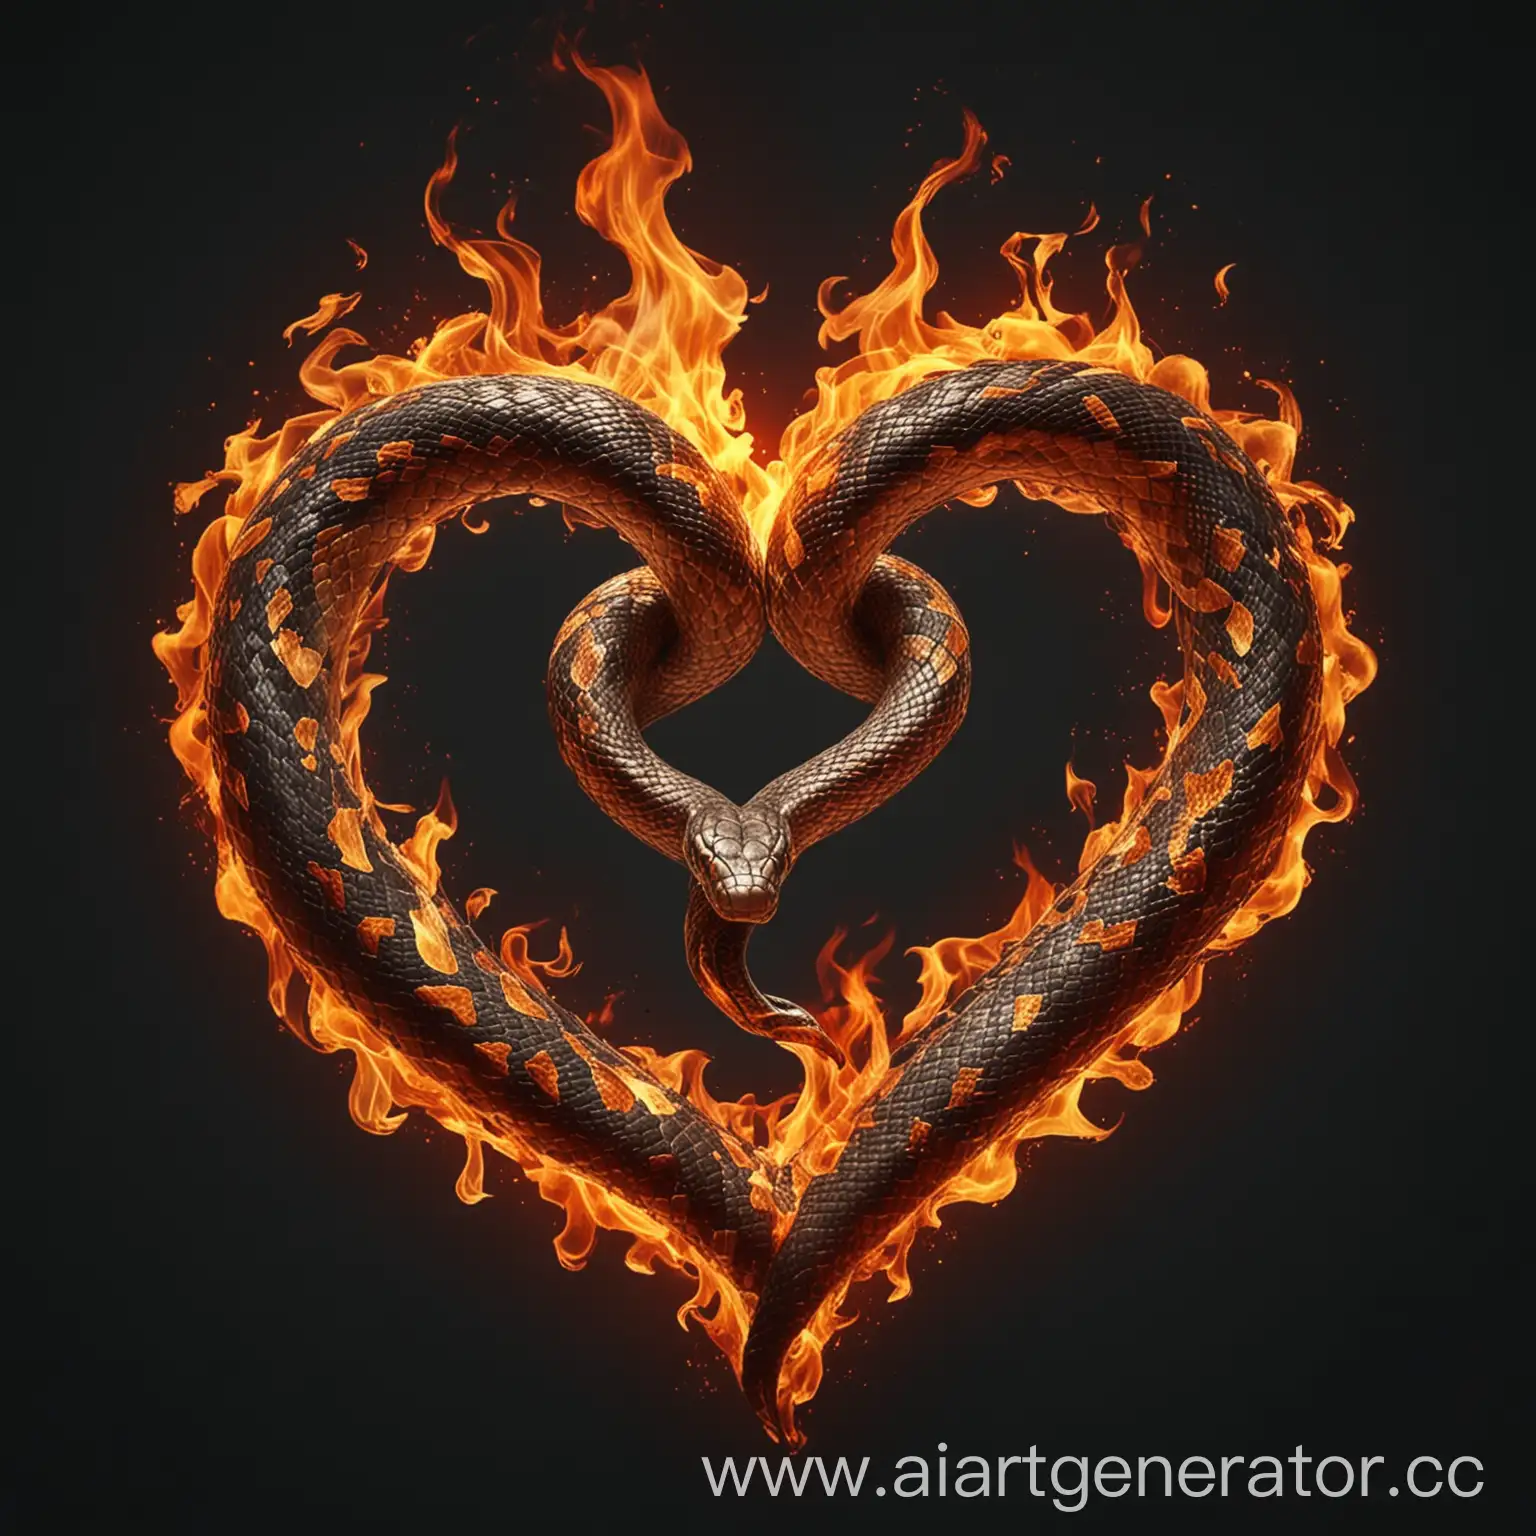 Burning-HeartShaped-Snake-Fiery-Symbol-of-Passion-and-Desire